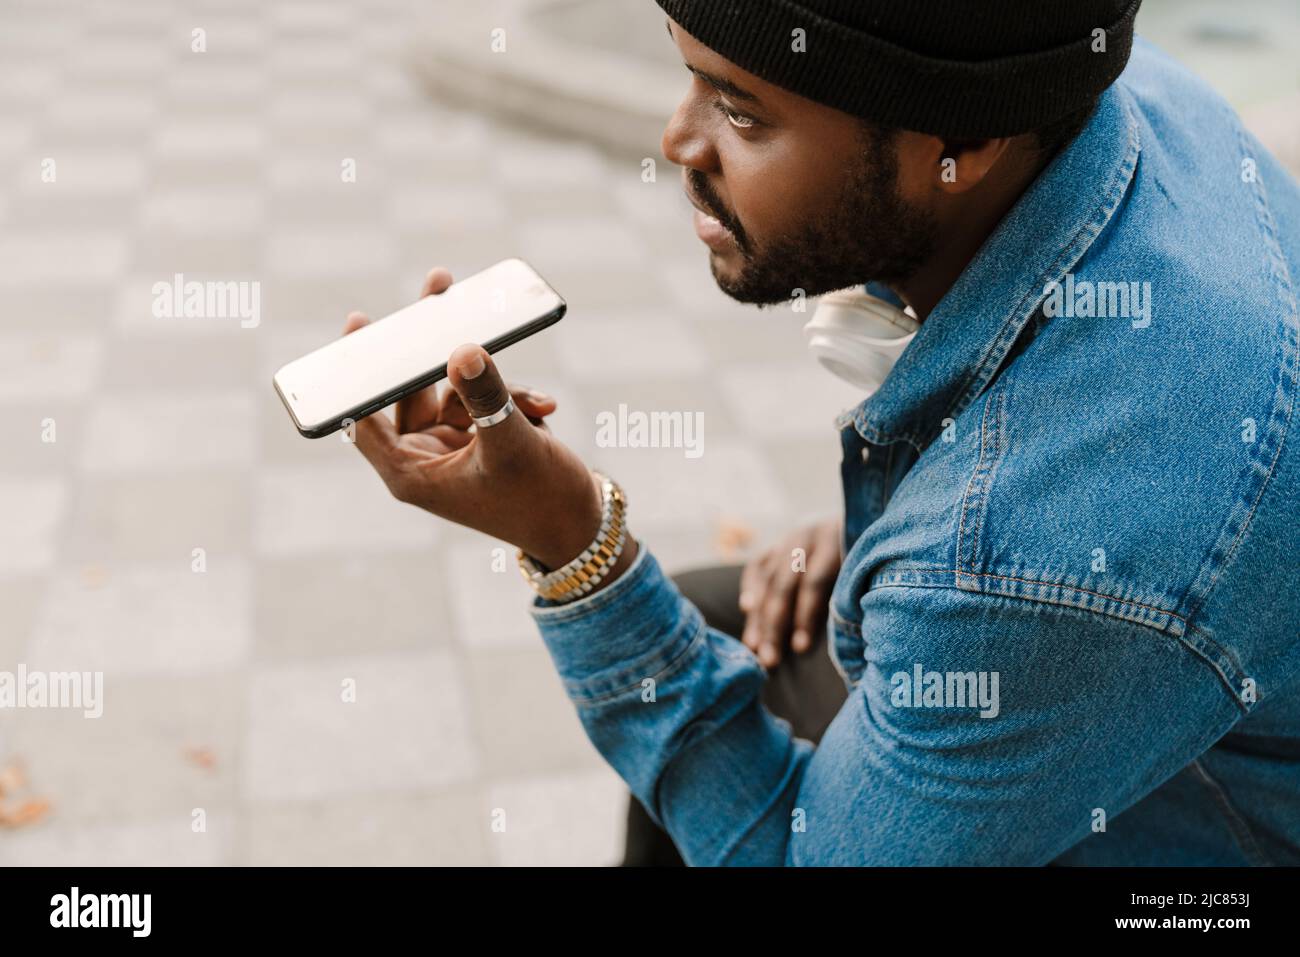 Black young man with headphones talking on mobile phone outdoors Stock Photo